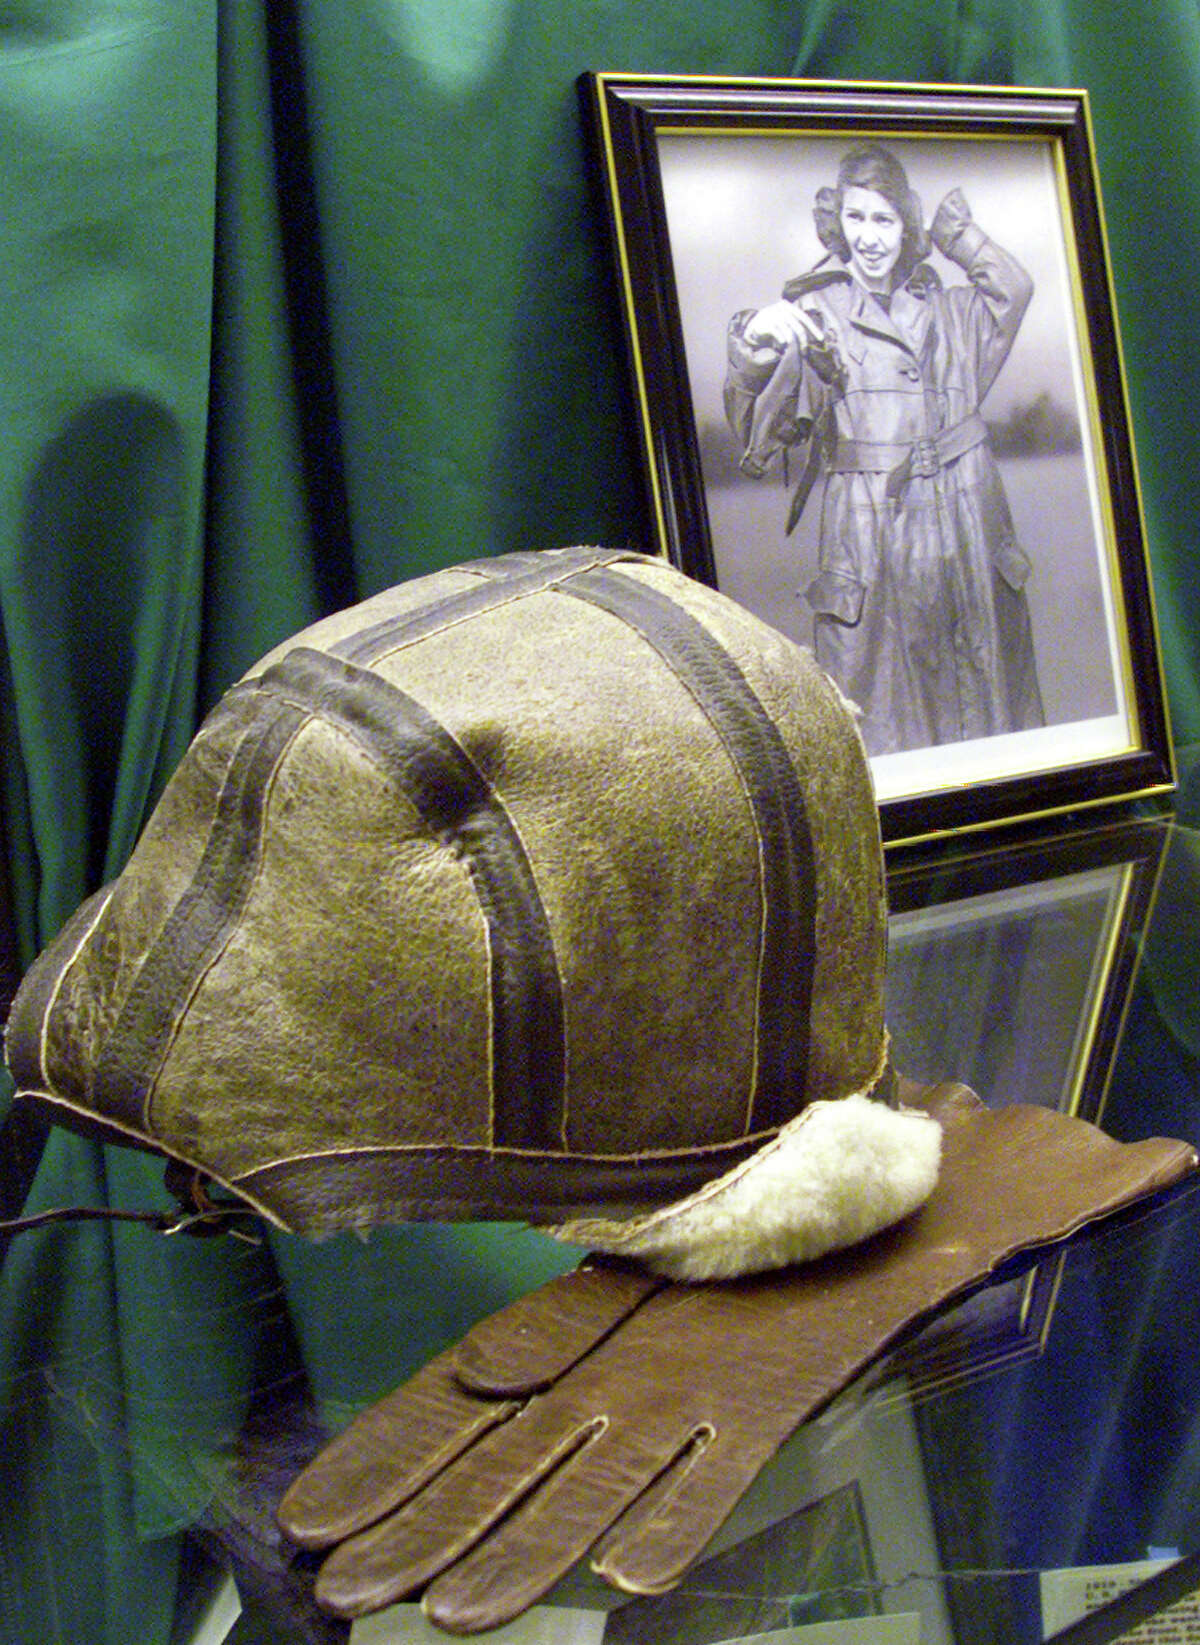 The flying hat and gloves once belonging to Katherine Stinson have been displayed in the hallway at Stinson Middle School on the northside.